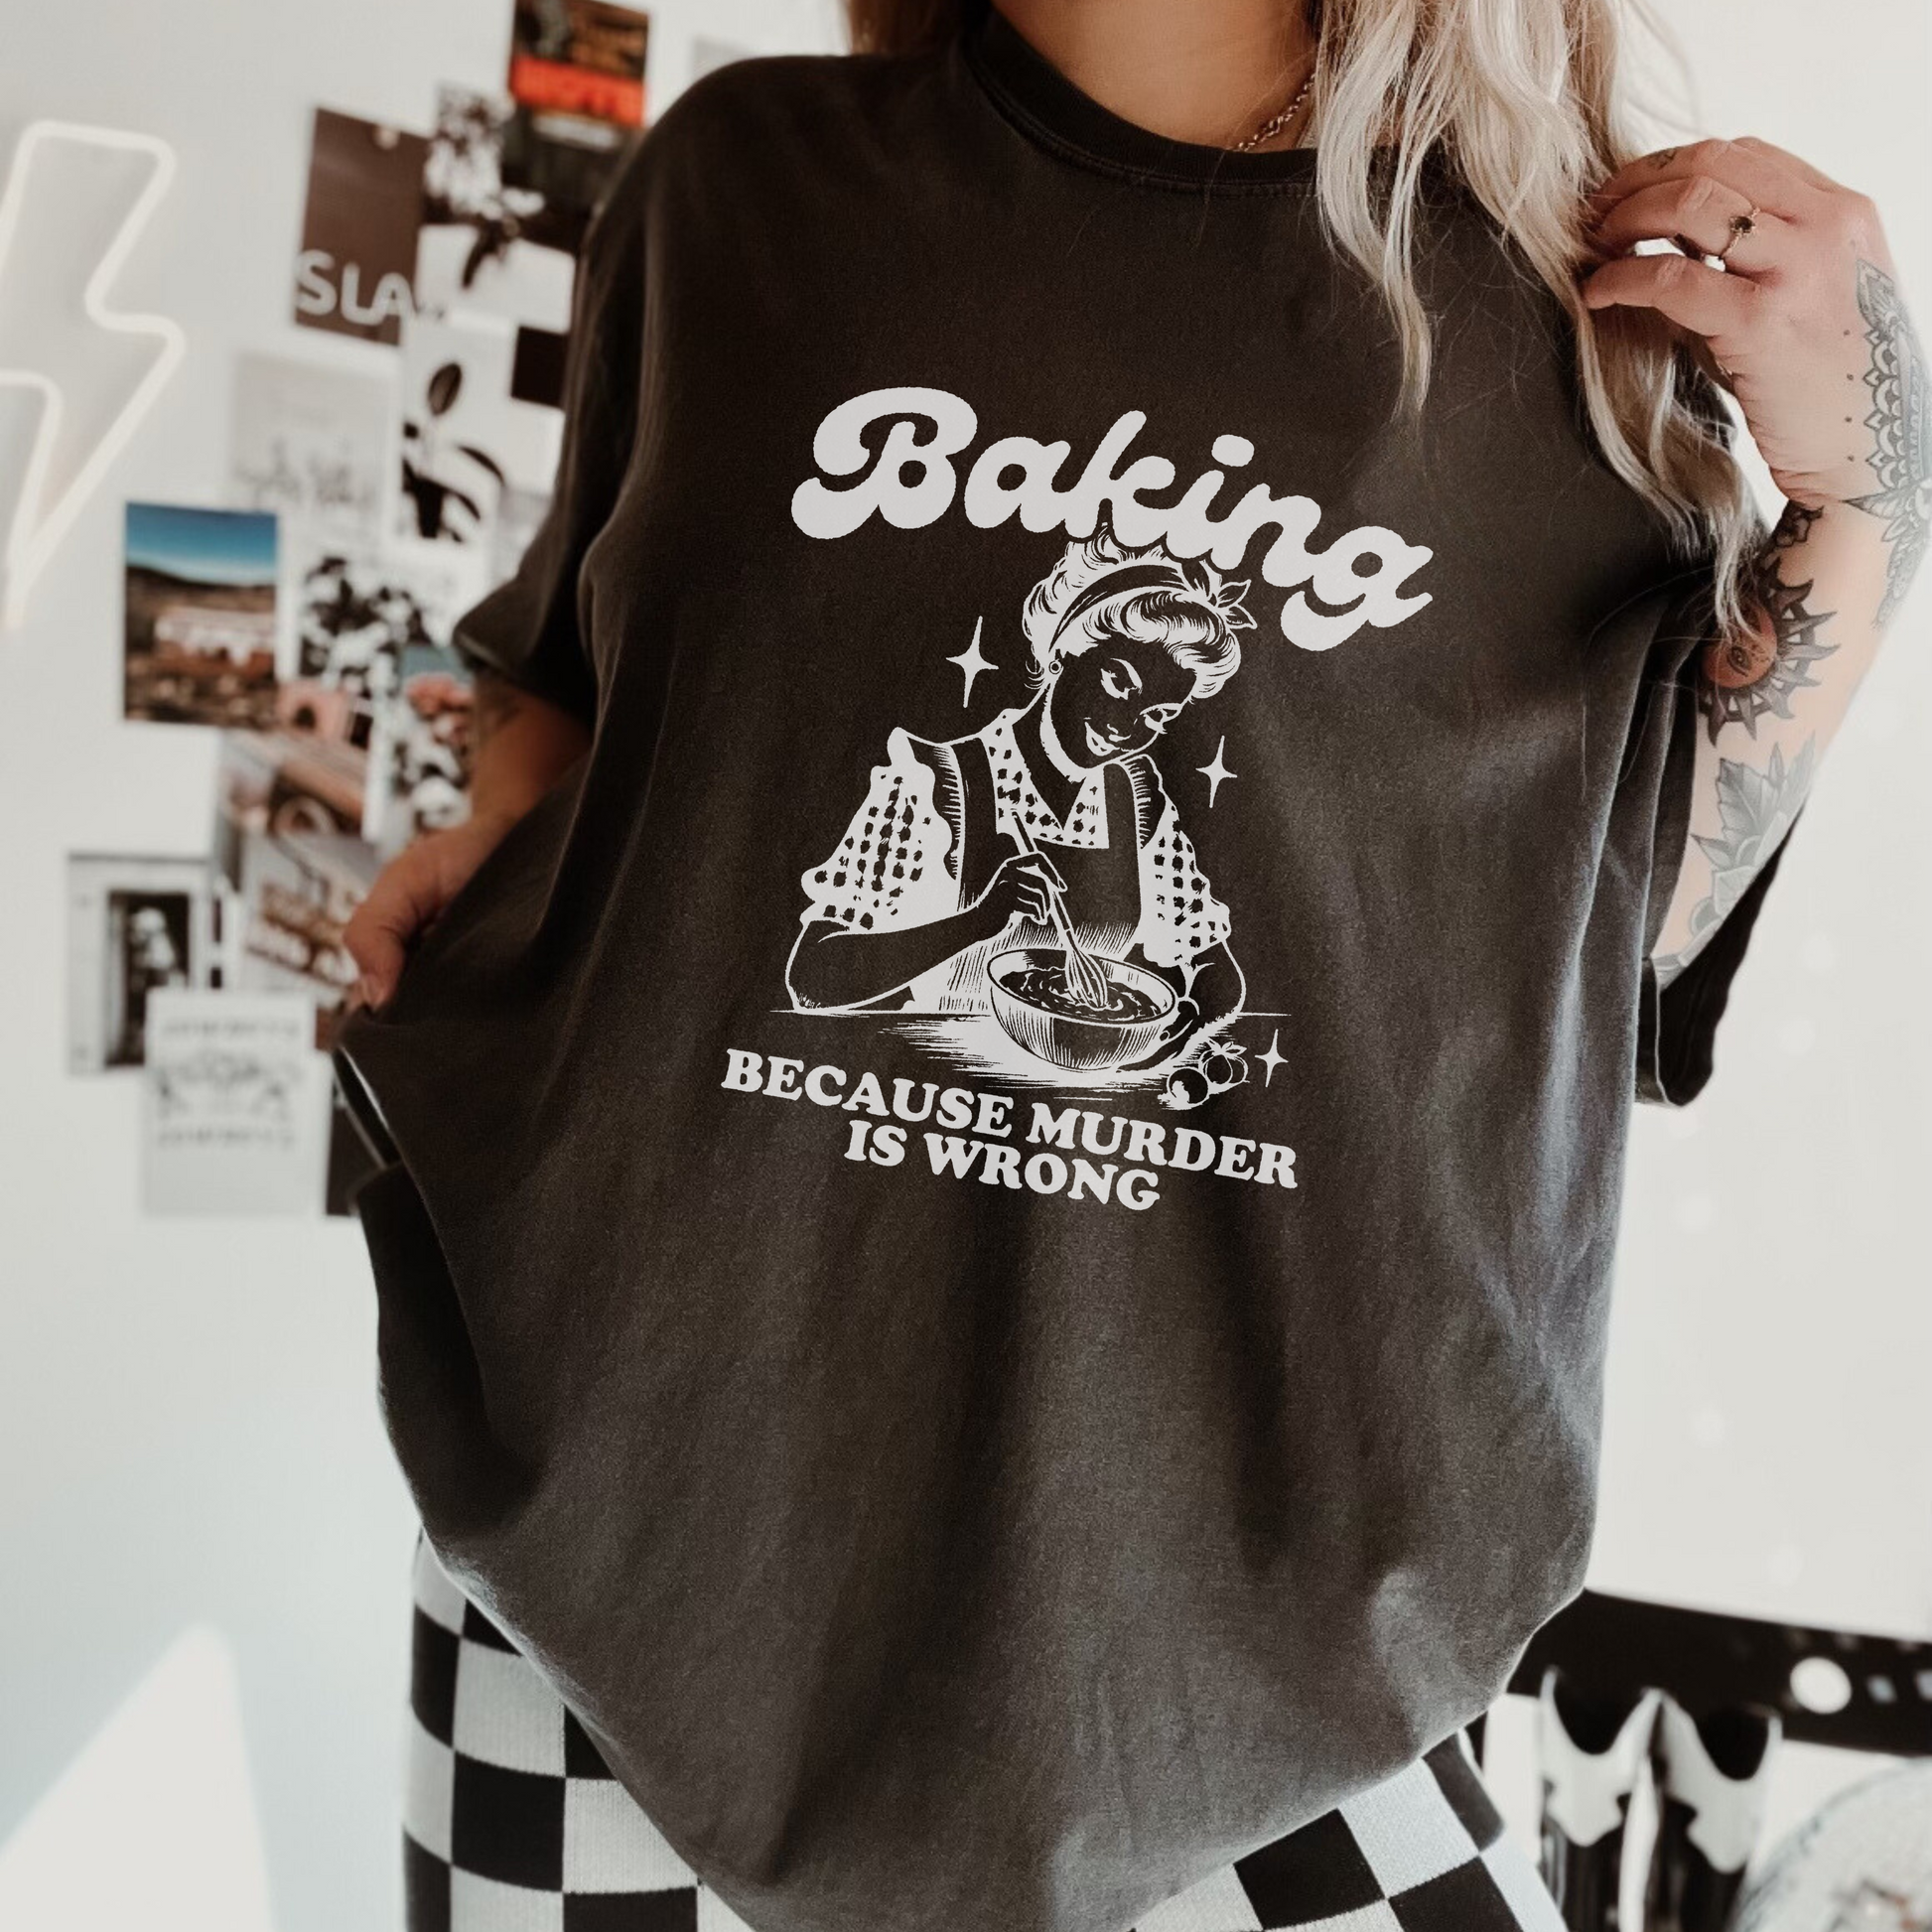 Baking, Because Murder Is Wrong  | Comfort Tee - Coco & Rho